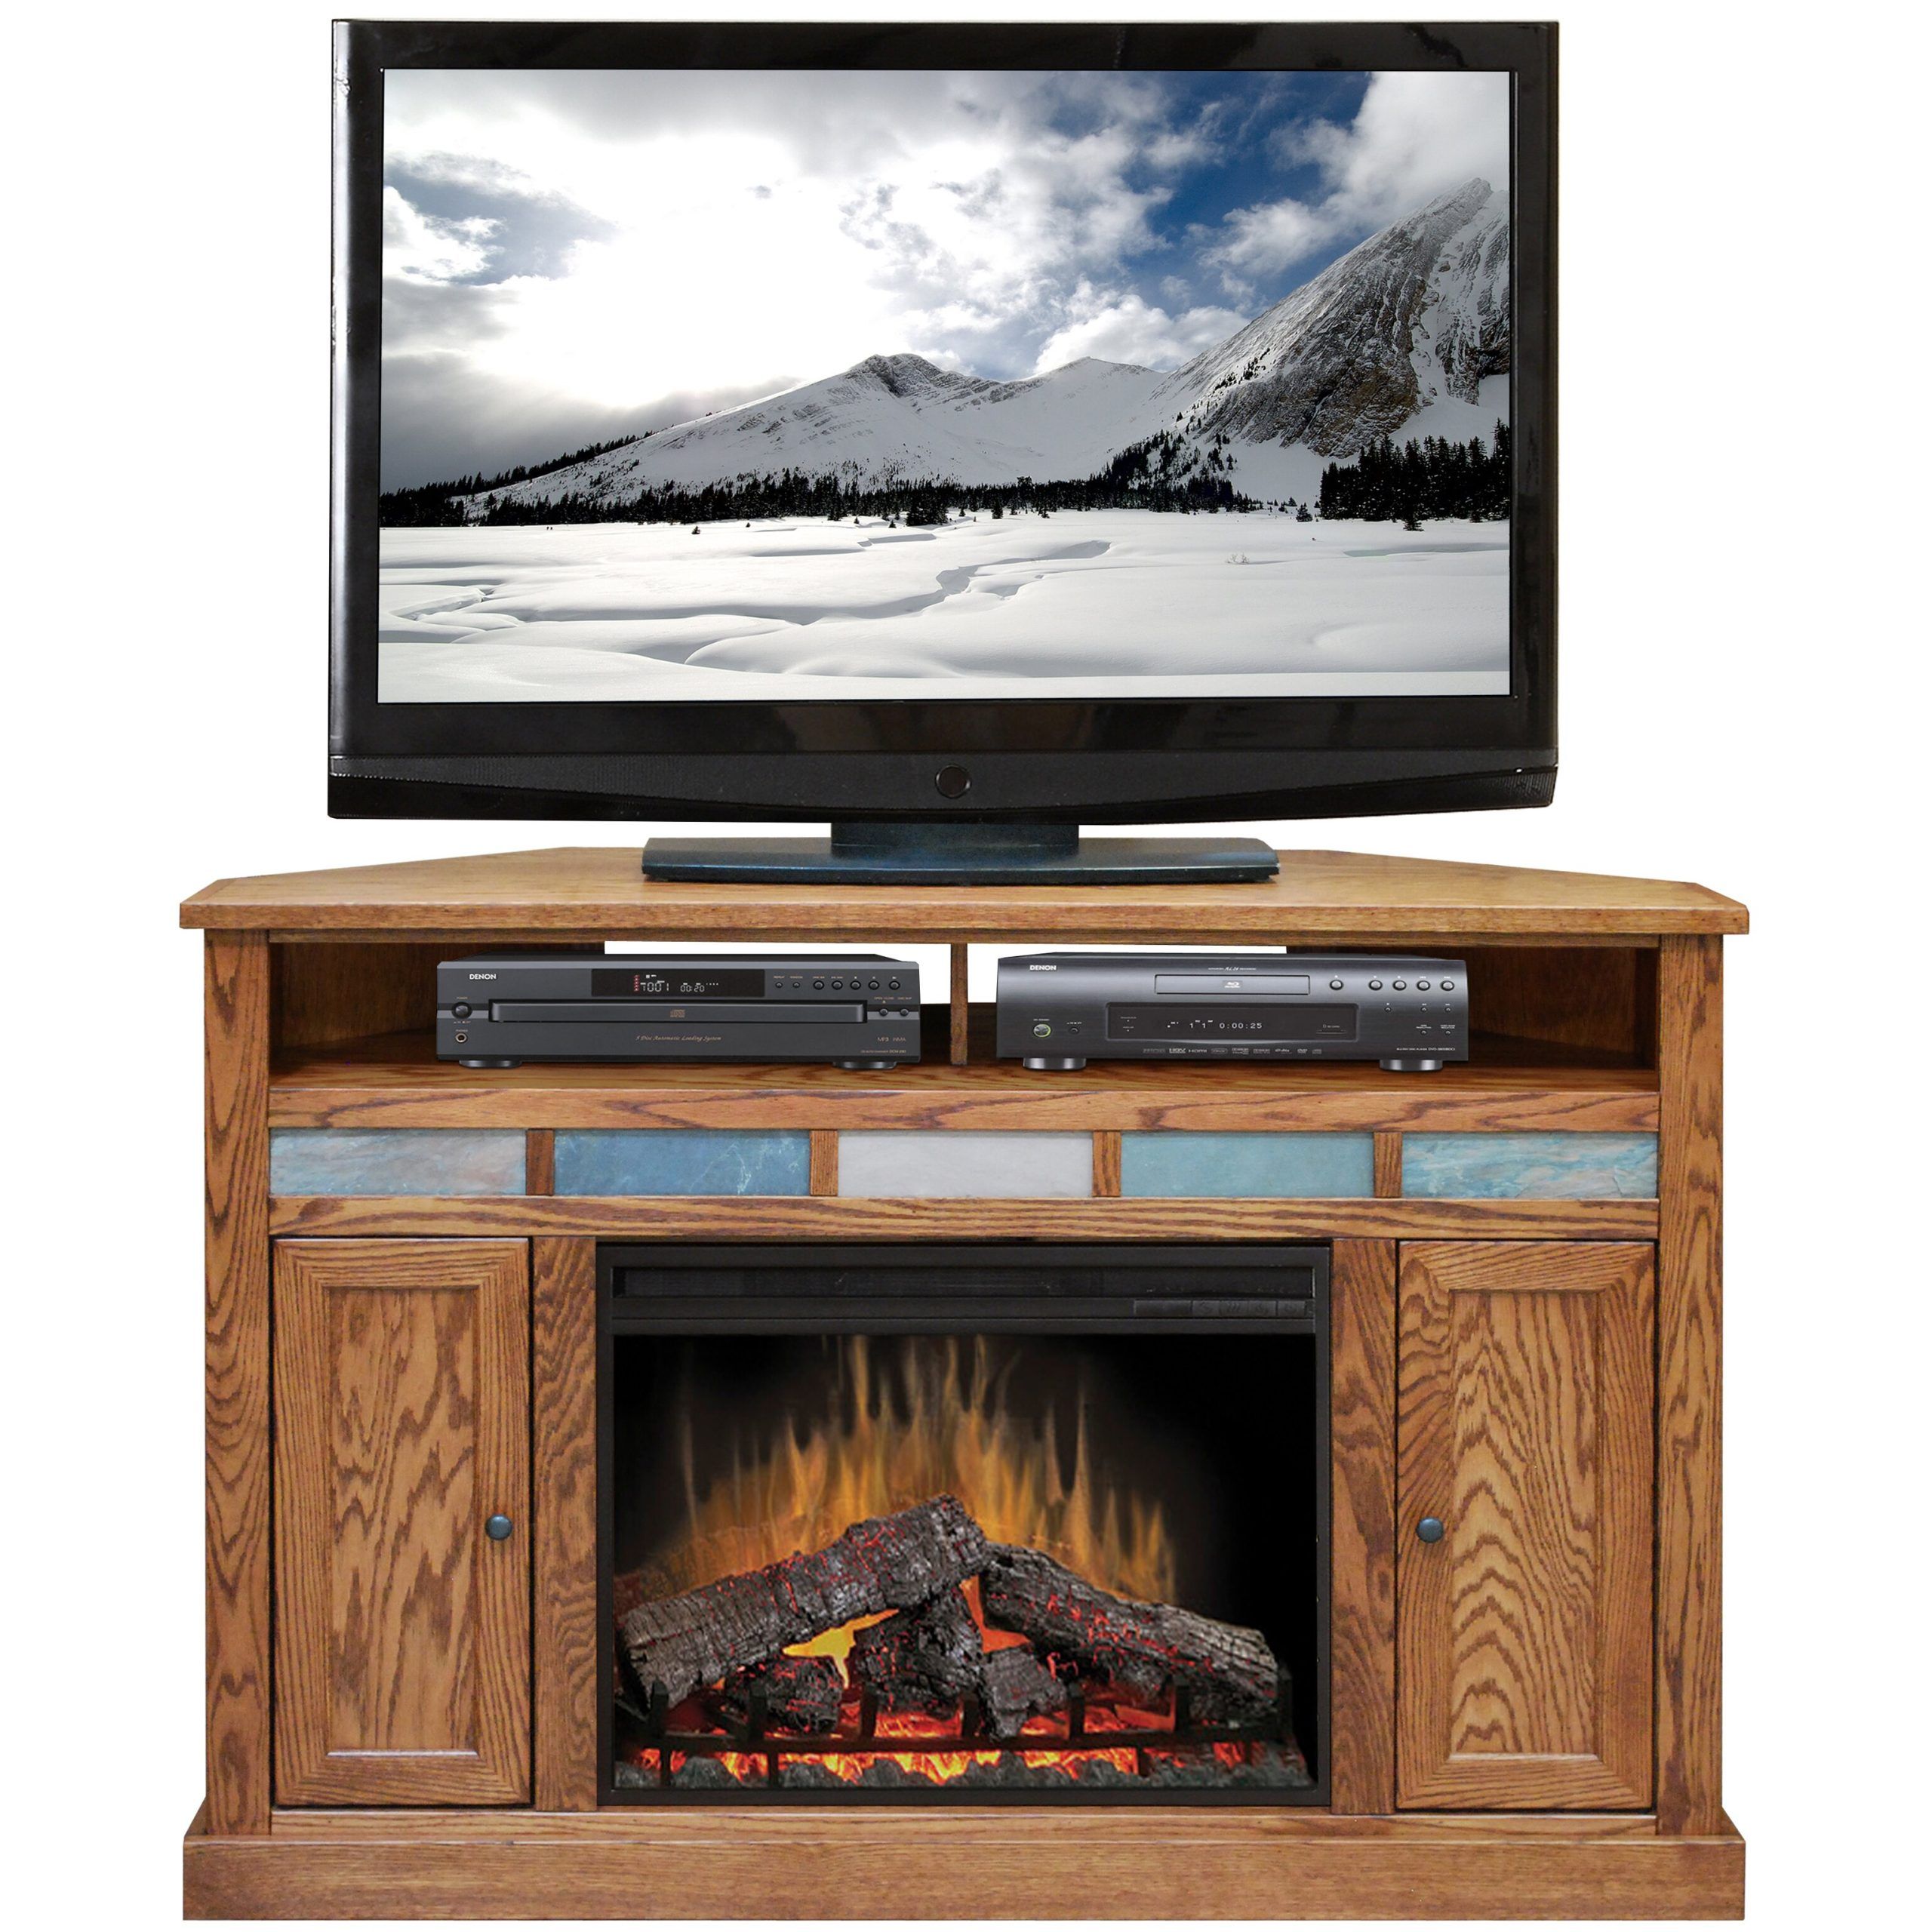 Legends Furniture Oak Creek Tv Stand With Electric Fireplace & Reviews Pertaining To Tv Stands With Electric Fireplace (Gallery 11 of 20)